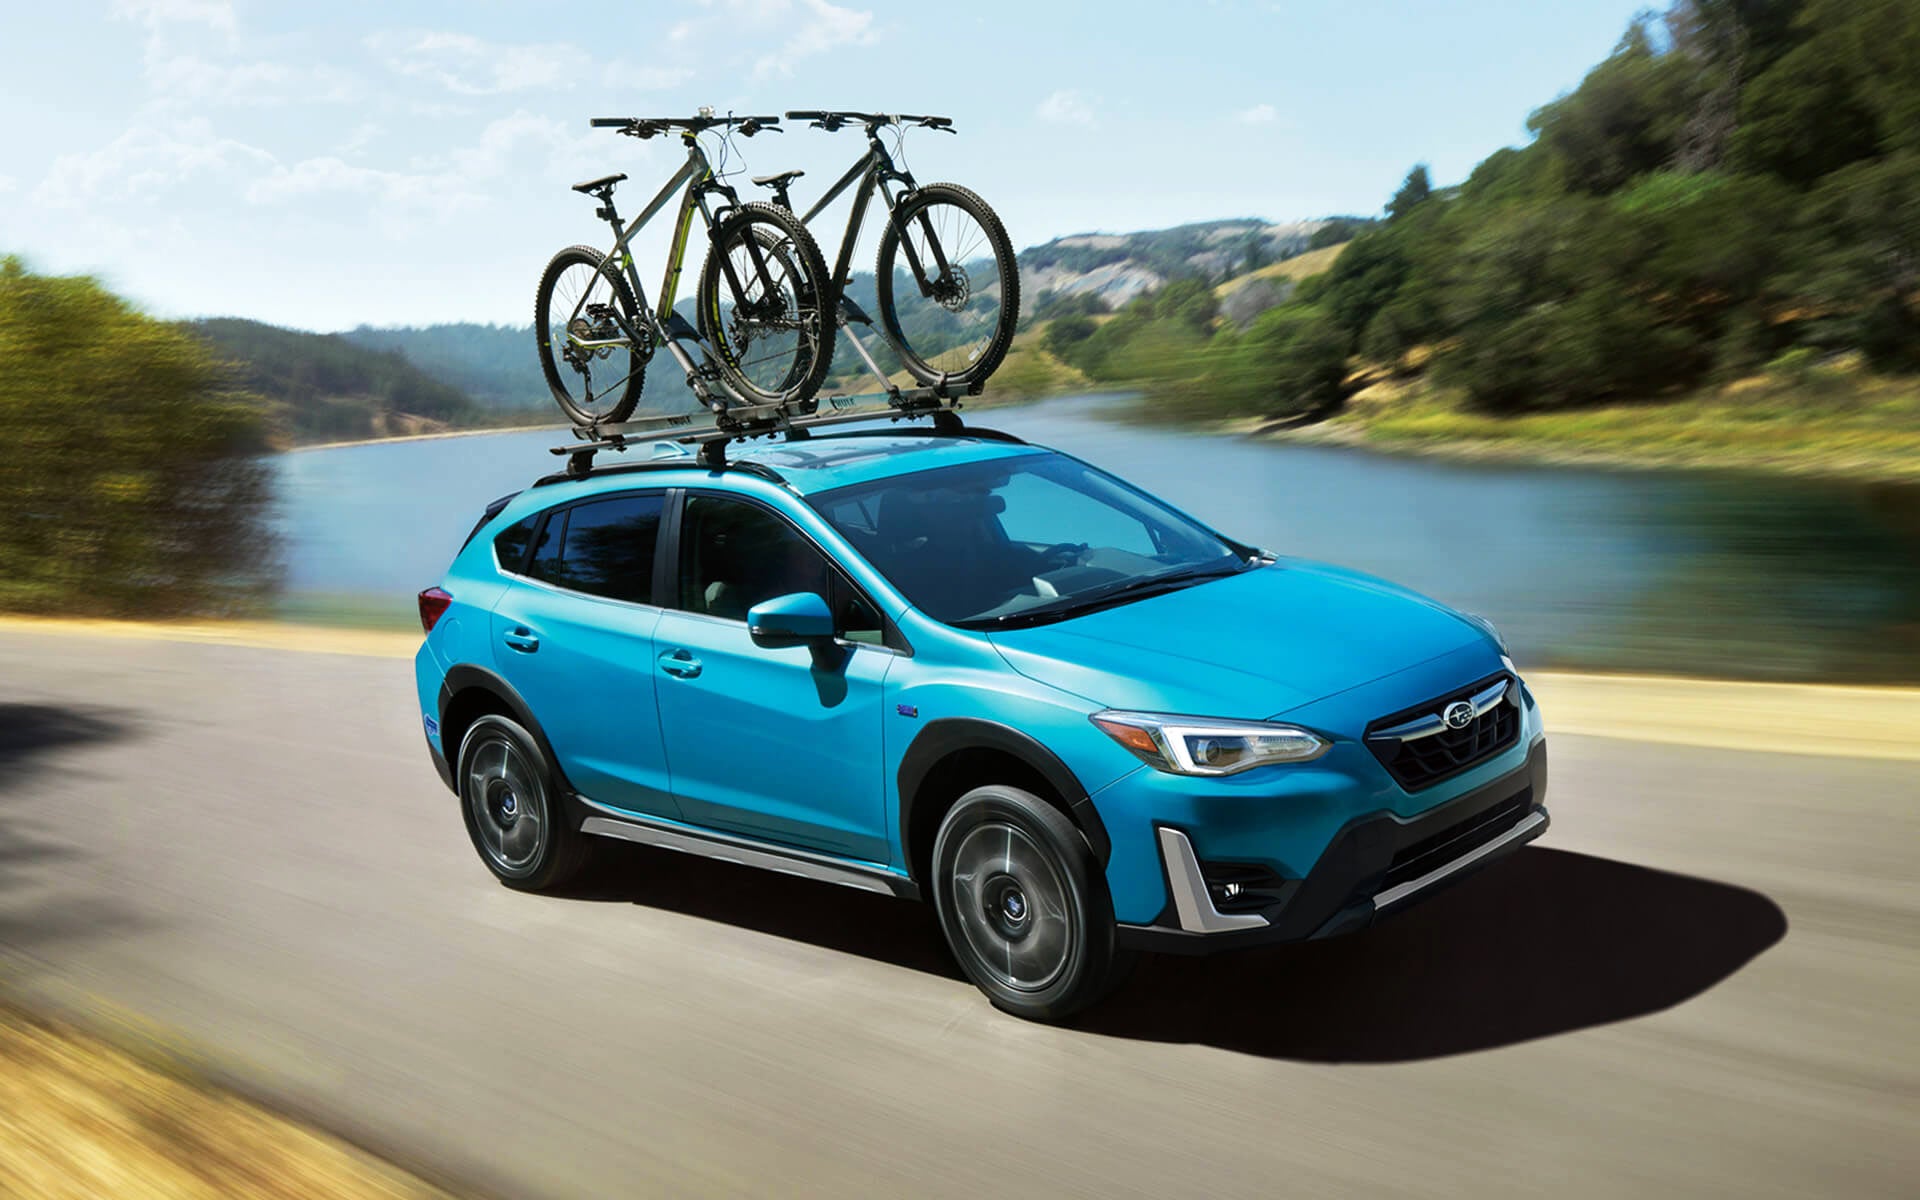 A blue Crosstrek Hybrid with two bicycles on its roof rack driving beside a river | Subaru of Spartanburg in Spartanburg SC